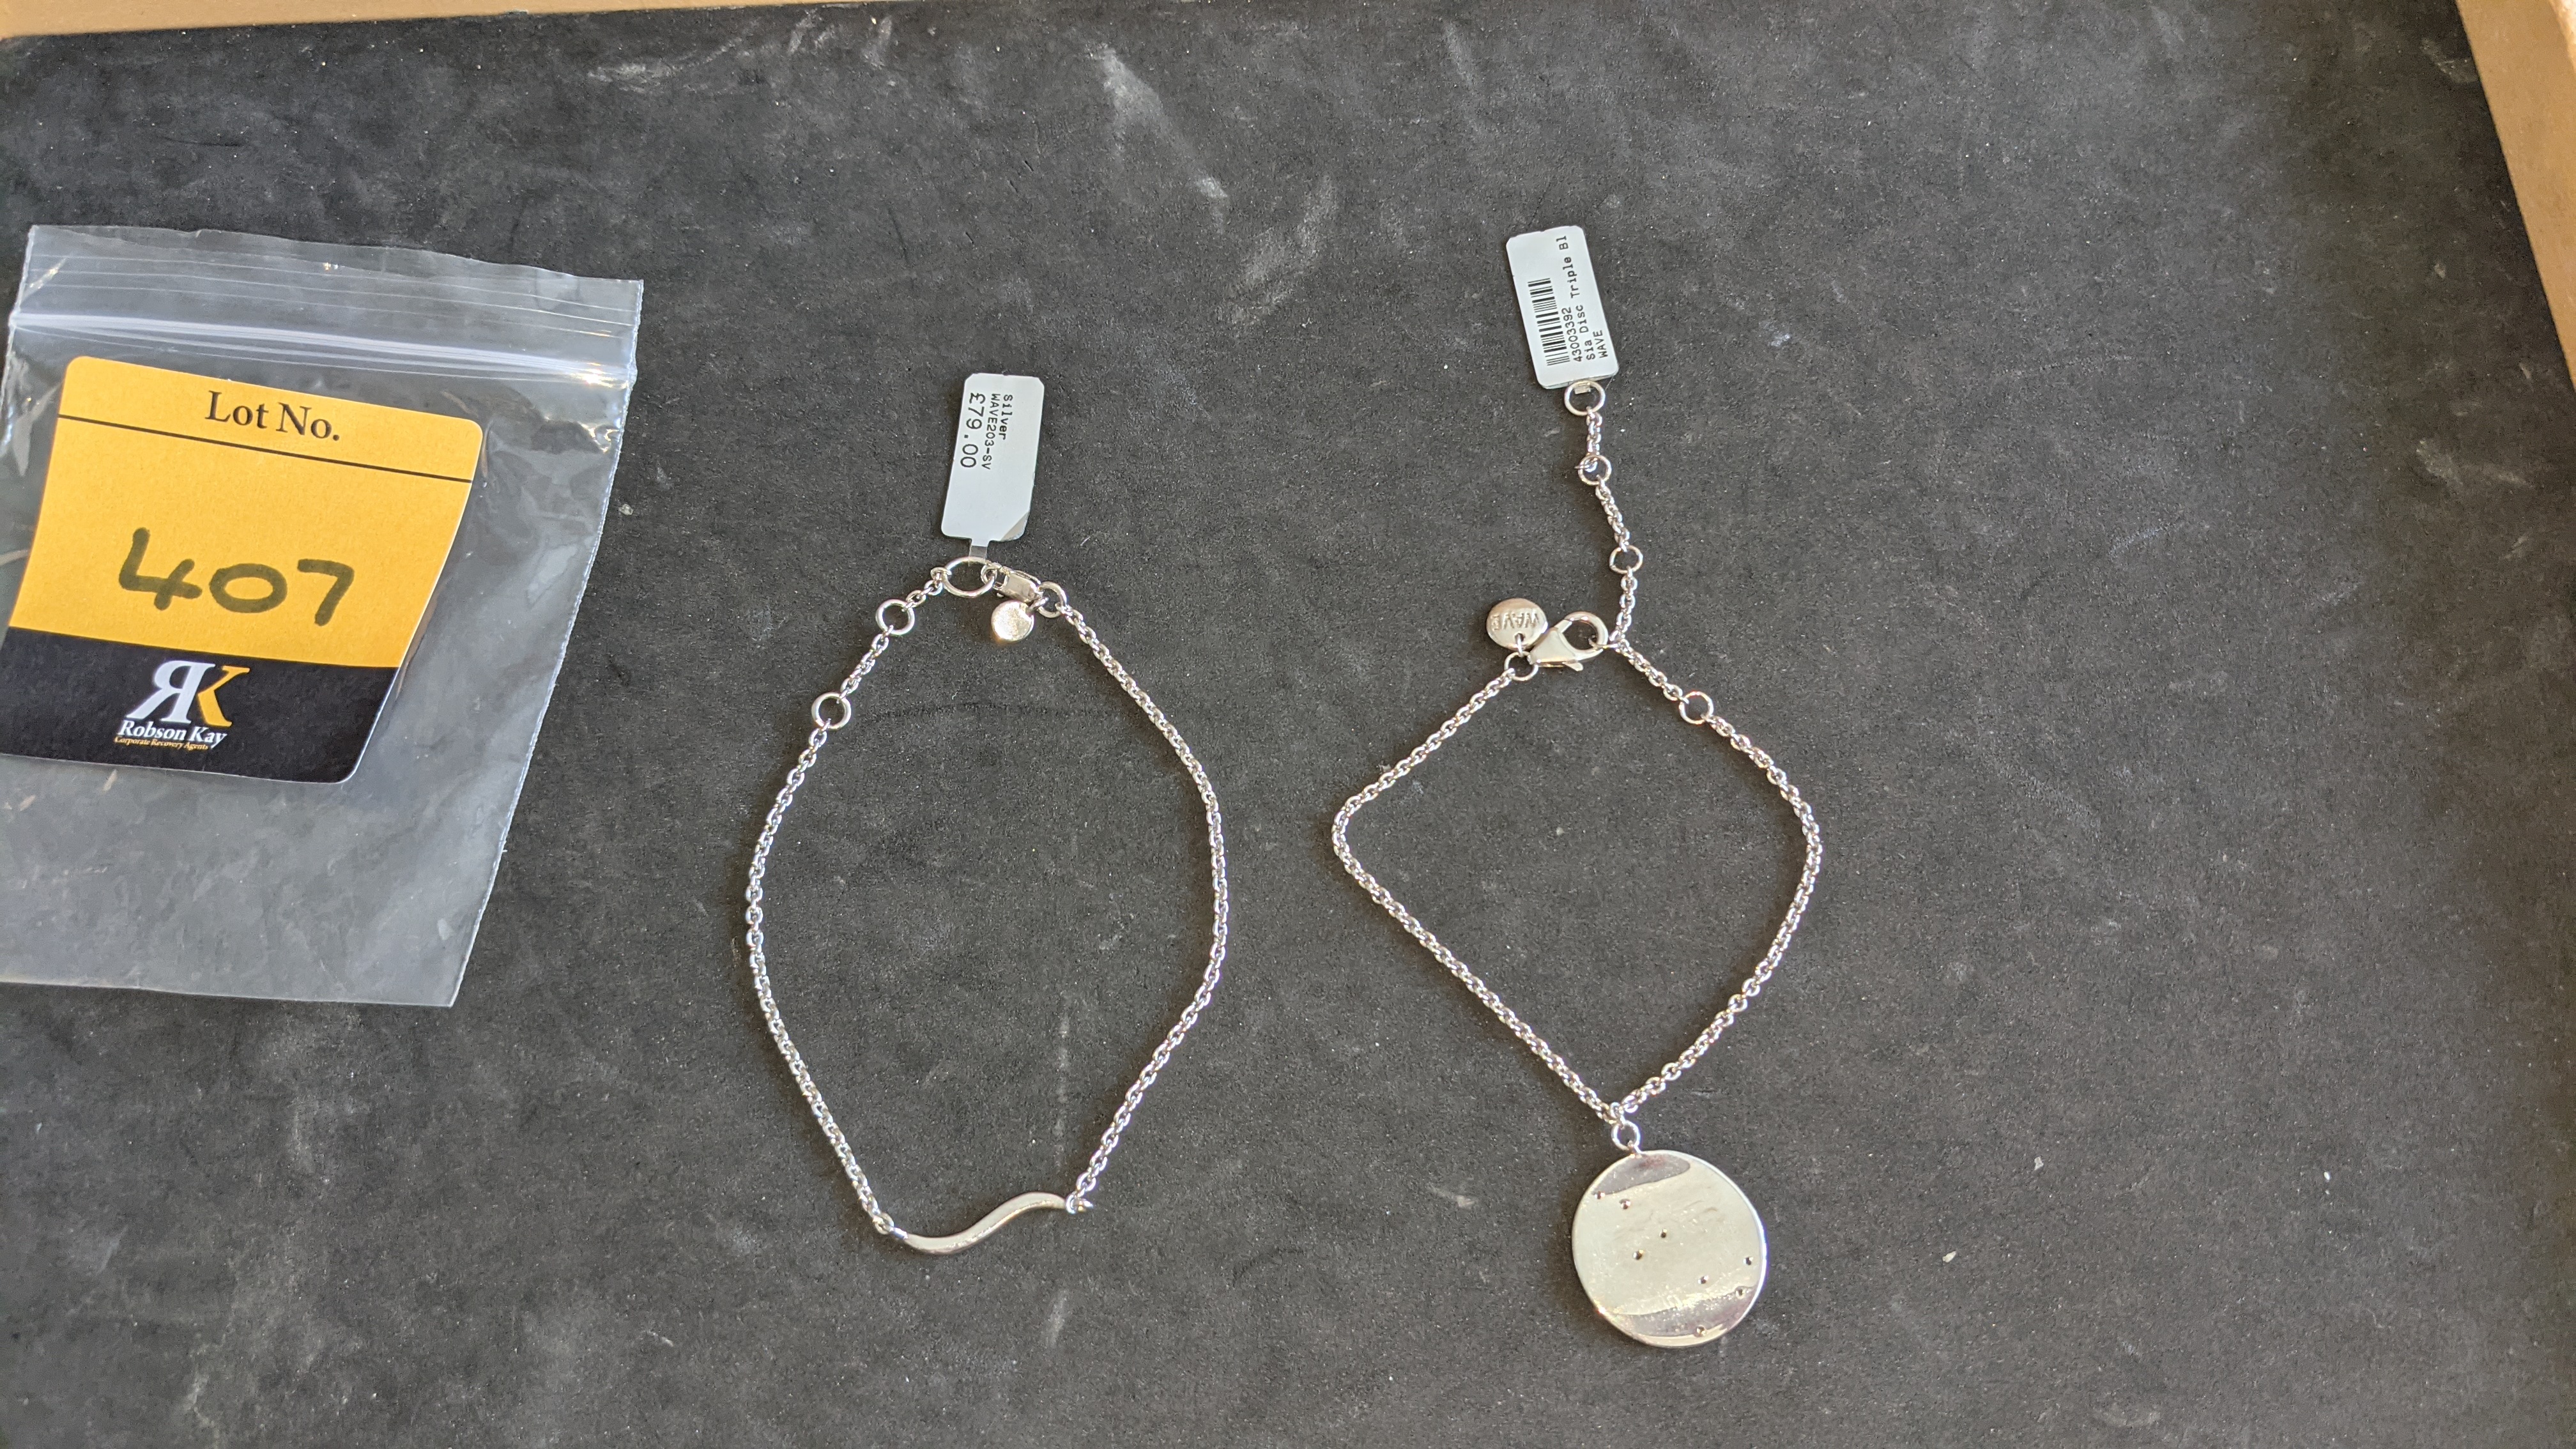 2 off assorted silver/silver & diamond bracelets, one with an RRP of £79 the other with an RRP of £1 - Image 12 of 12